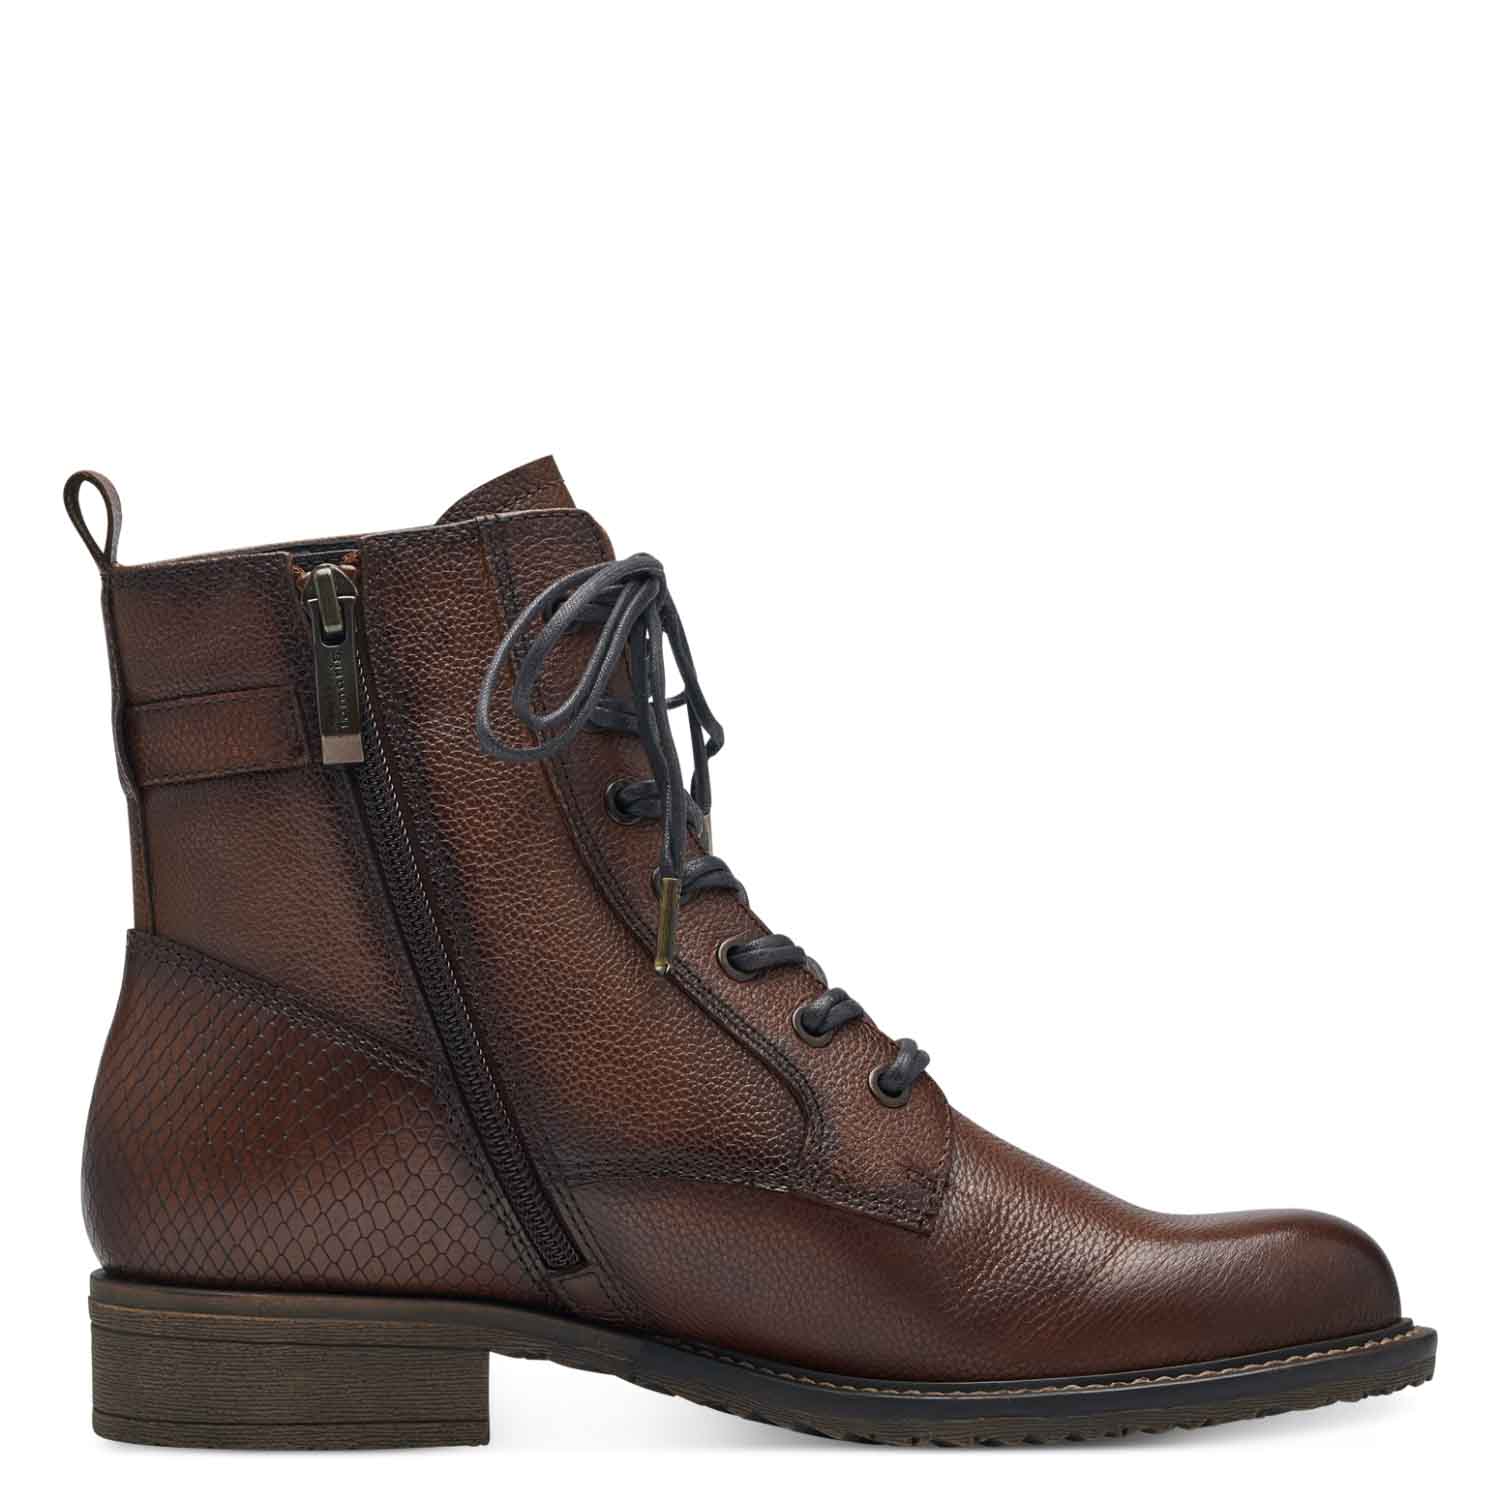  Side view of the inside of the brown lace up boots, highlighting the zipper detail.